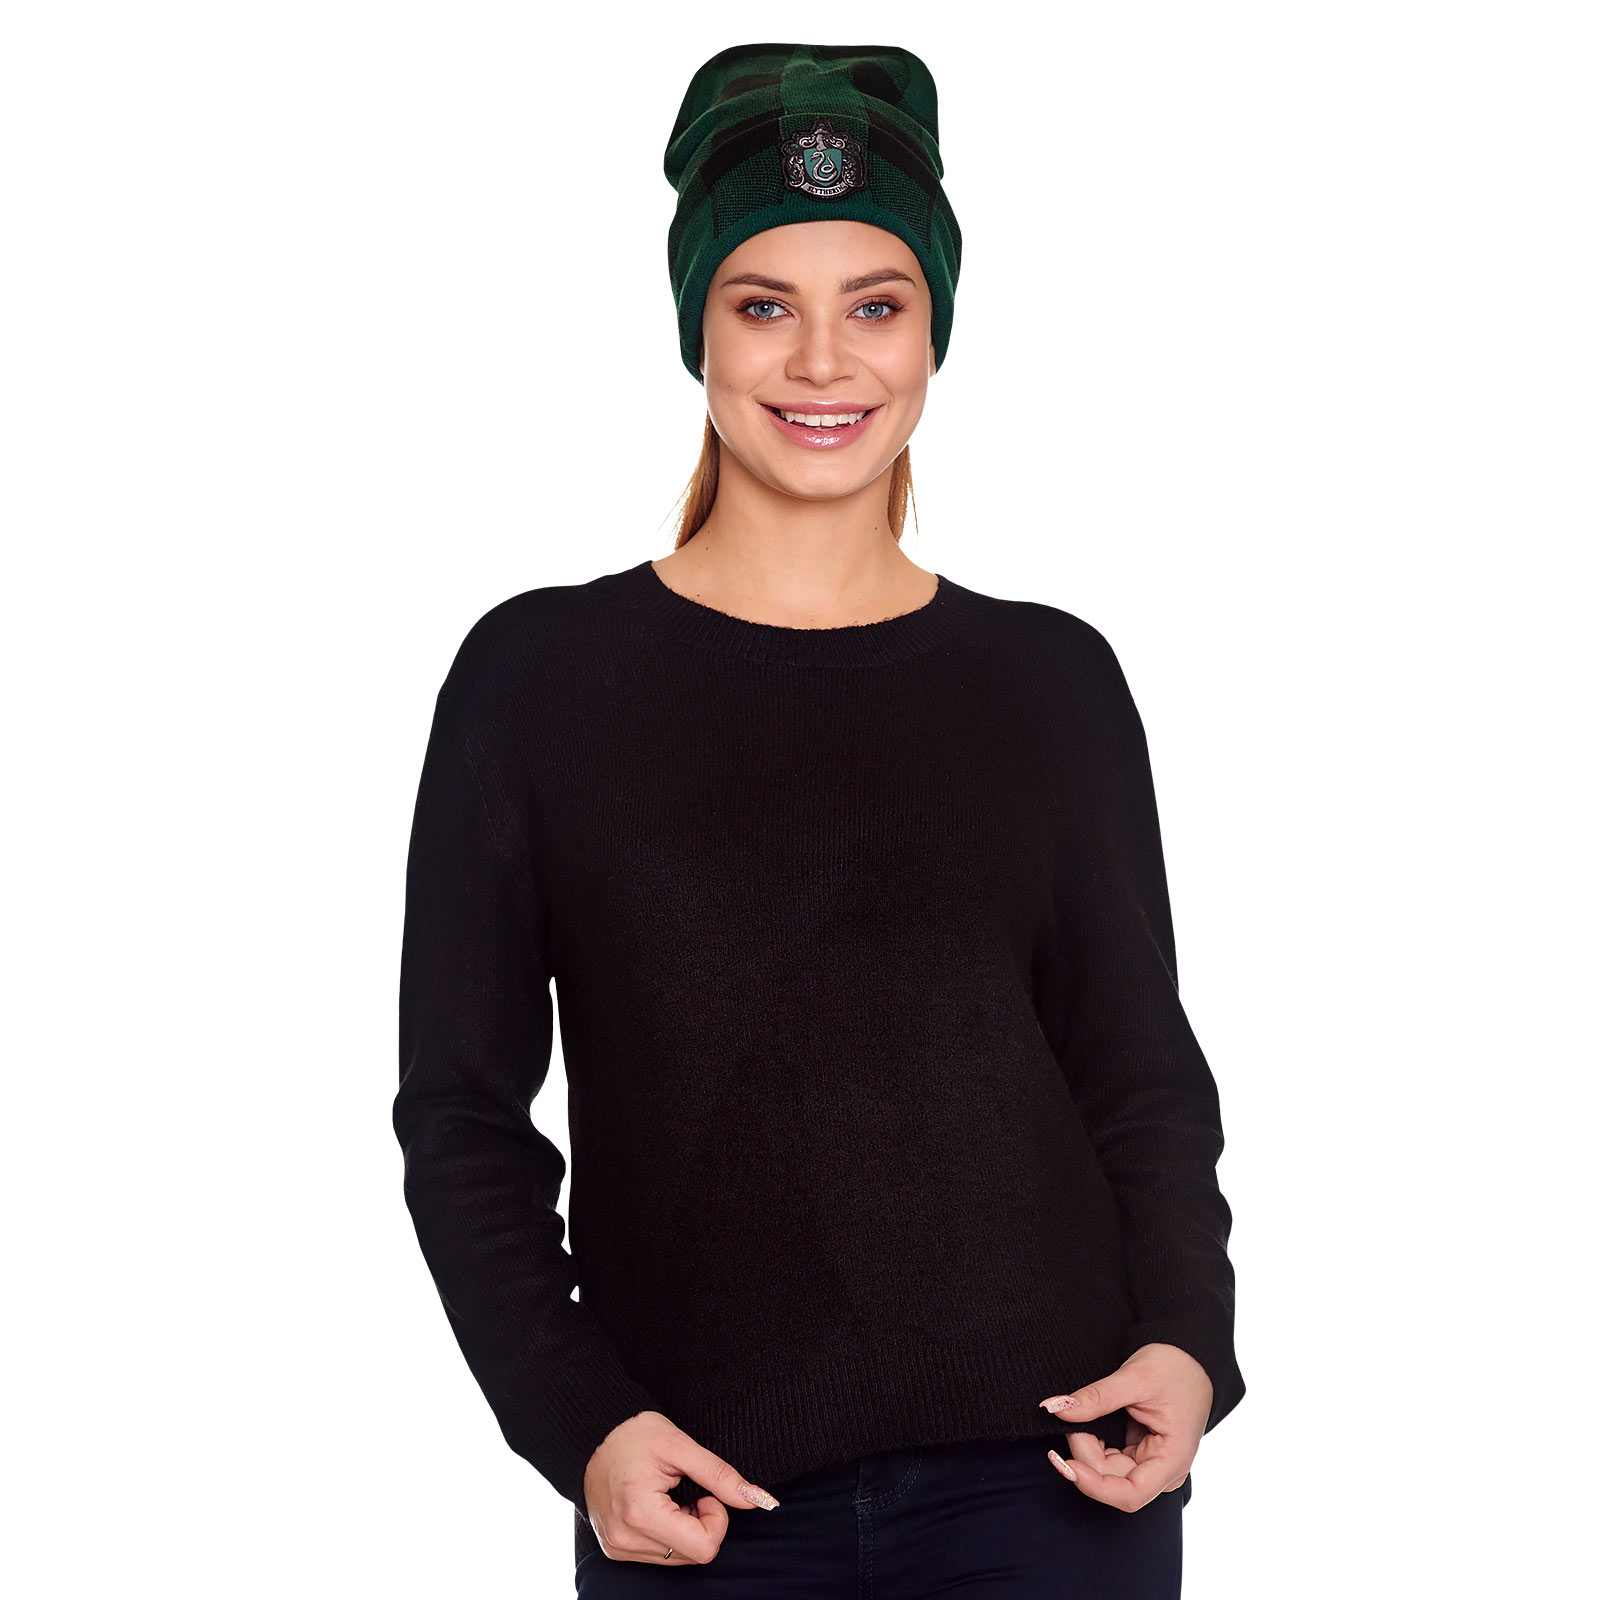 Harry Potter - Slytherin Crest Checkered Beanie